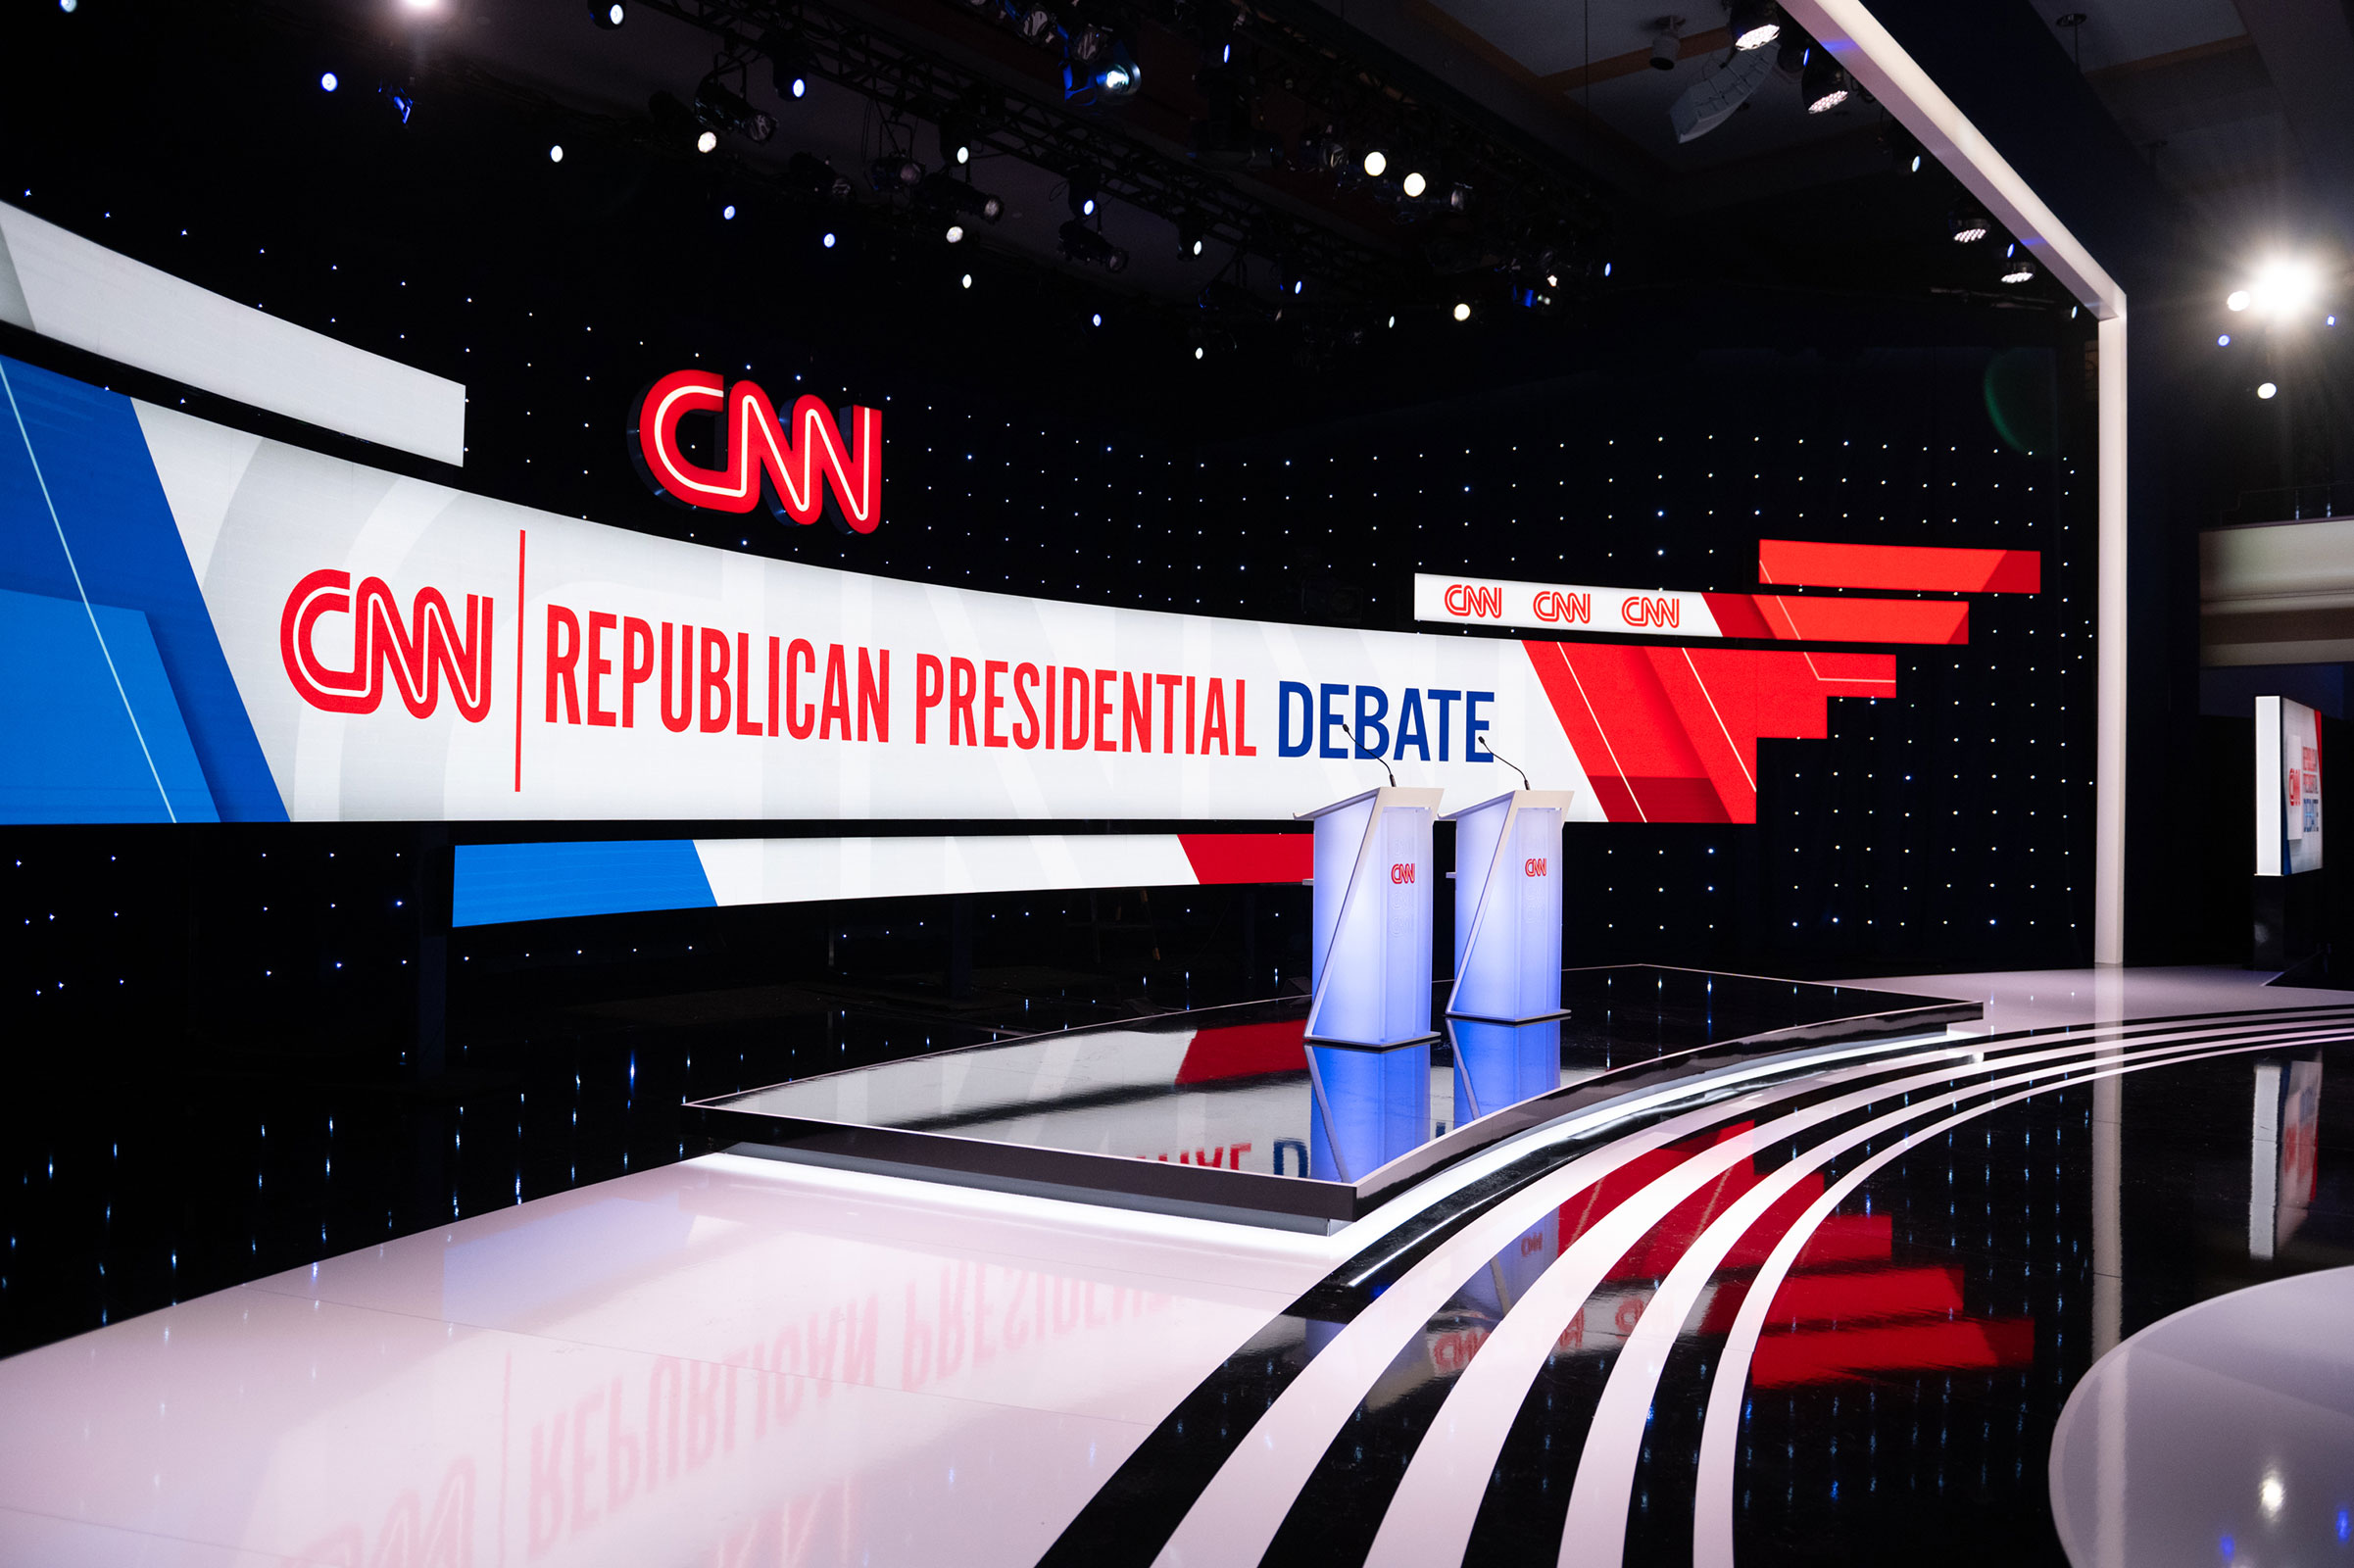 The stage is set ahead of CNN’s Republican Presidential debate with former South Carolina Gov. Nikki Haley and Florida Gov. Ron DeSantis in Des Moines, Iowa, on January 10. 